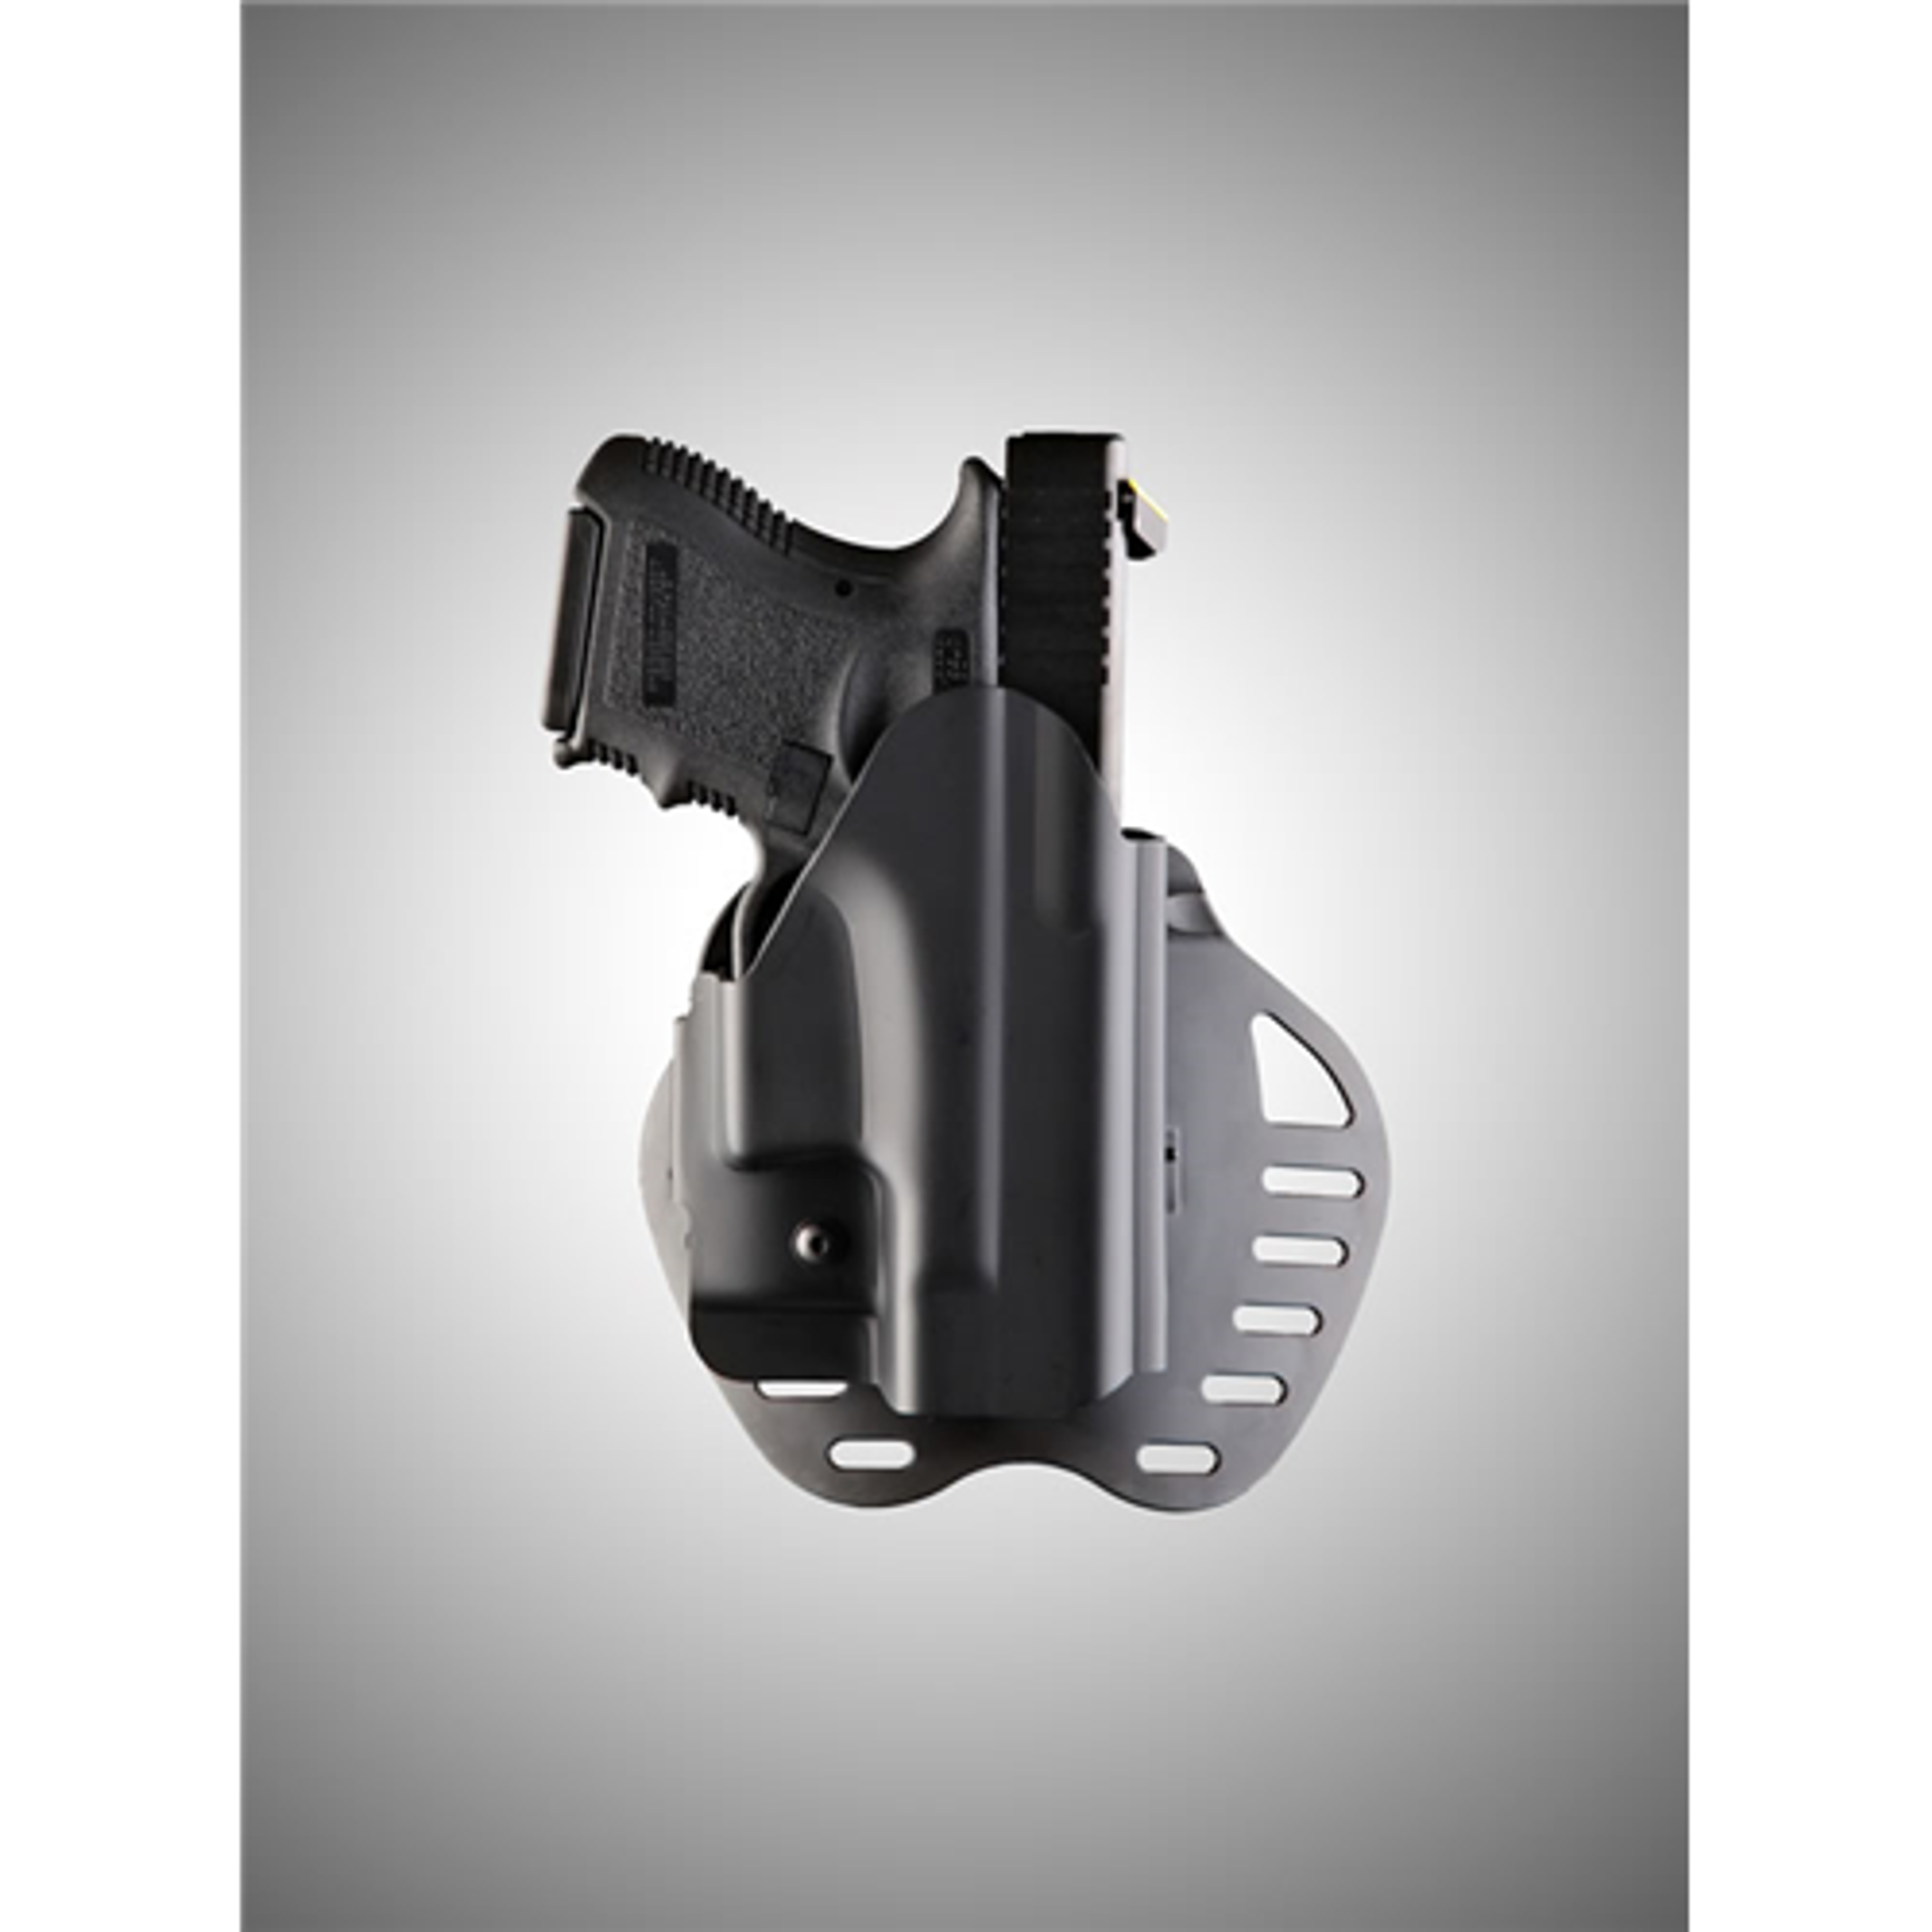 Ars Stage 1 - Carry Holster